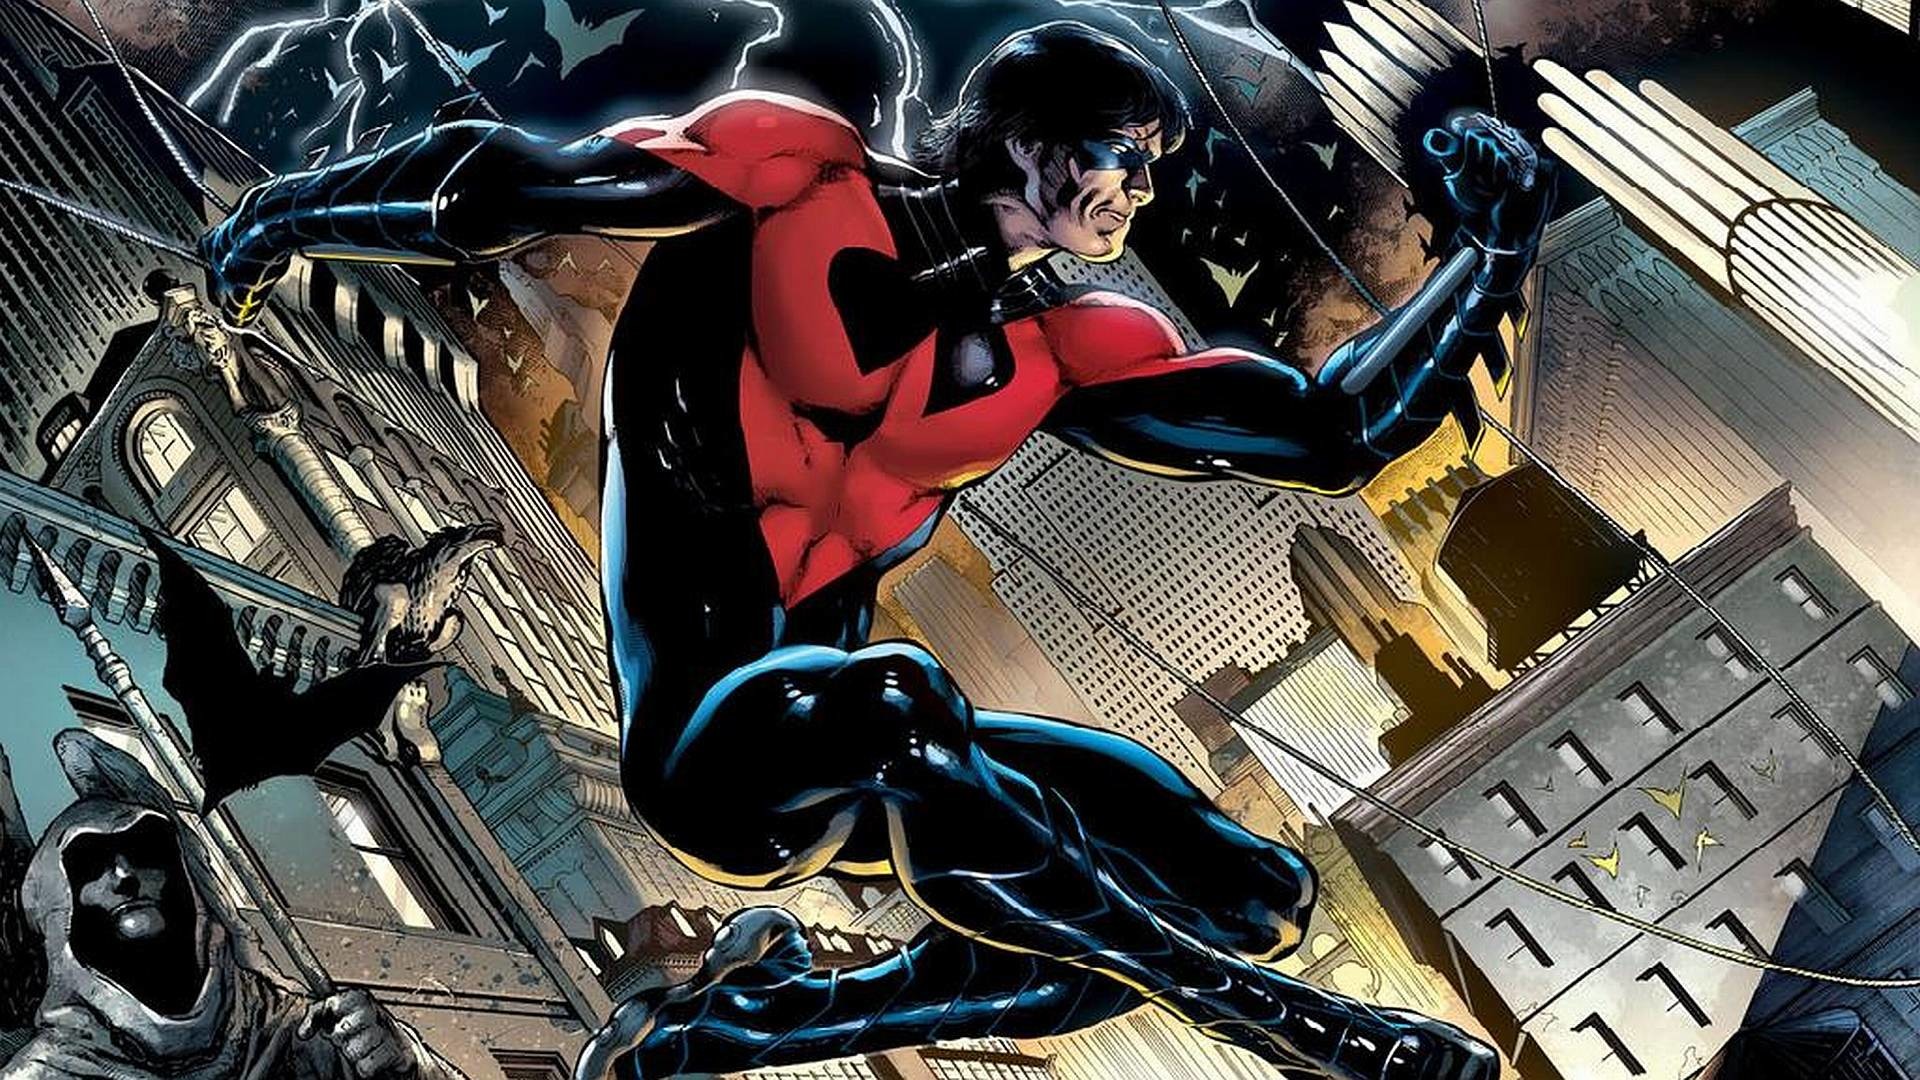 1920x1080 Nightwing Wallpaper 24 258558 Images HD Wallpapers| Wallfoy.